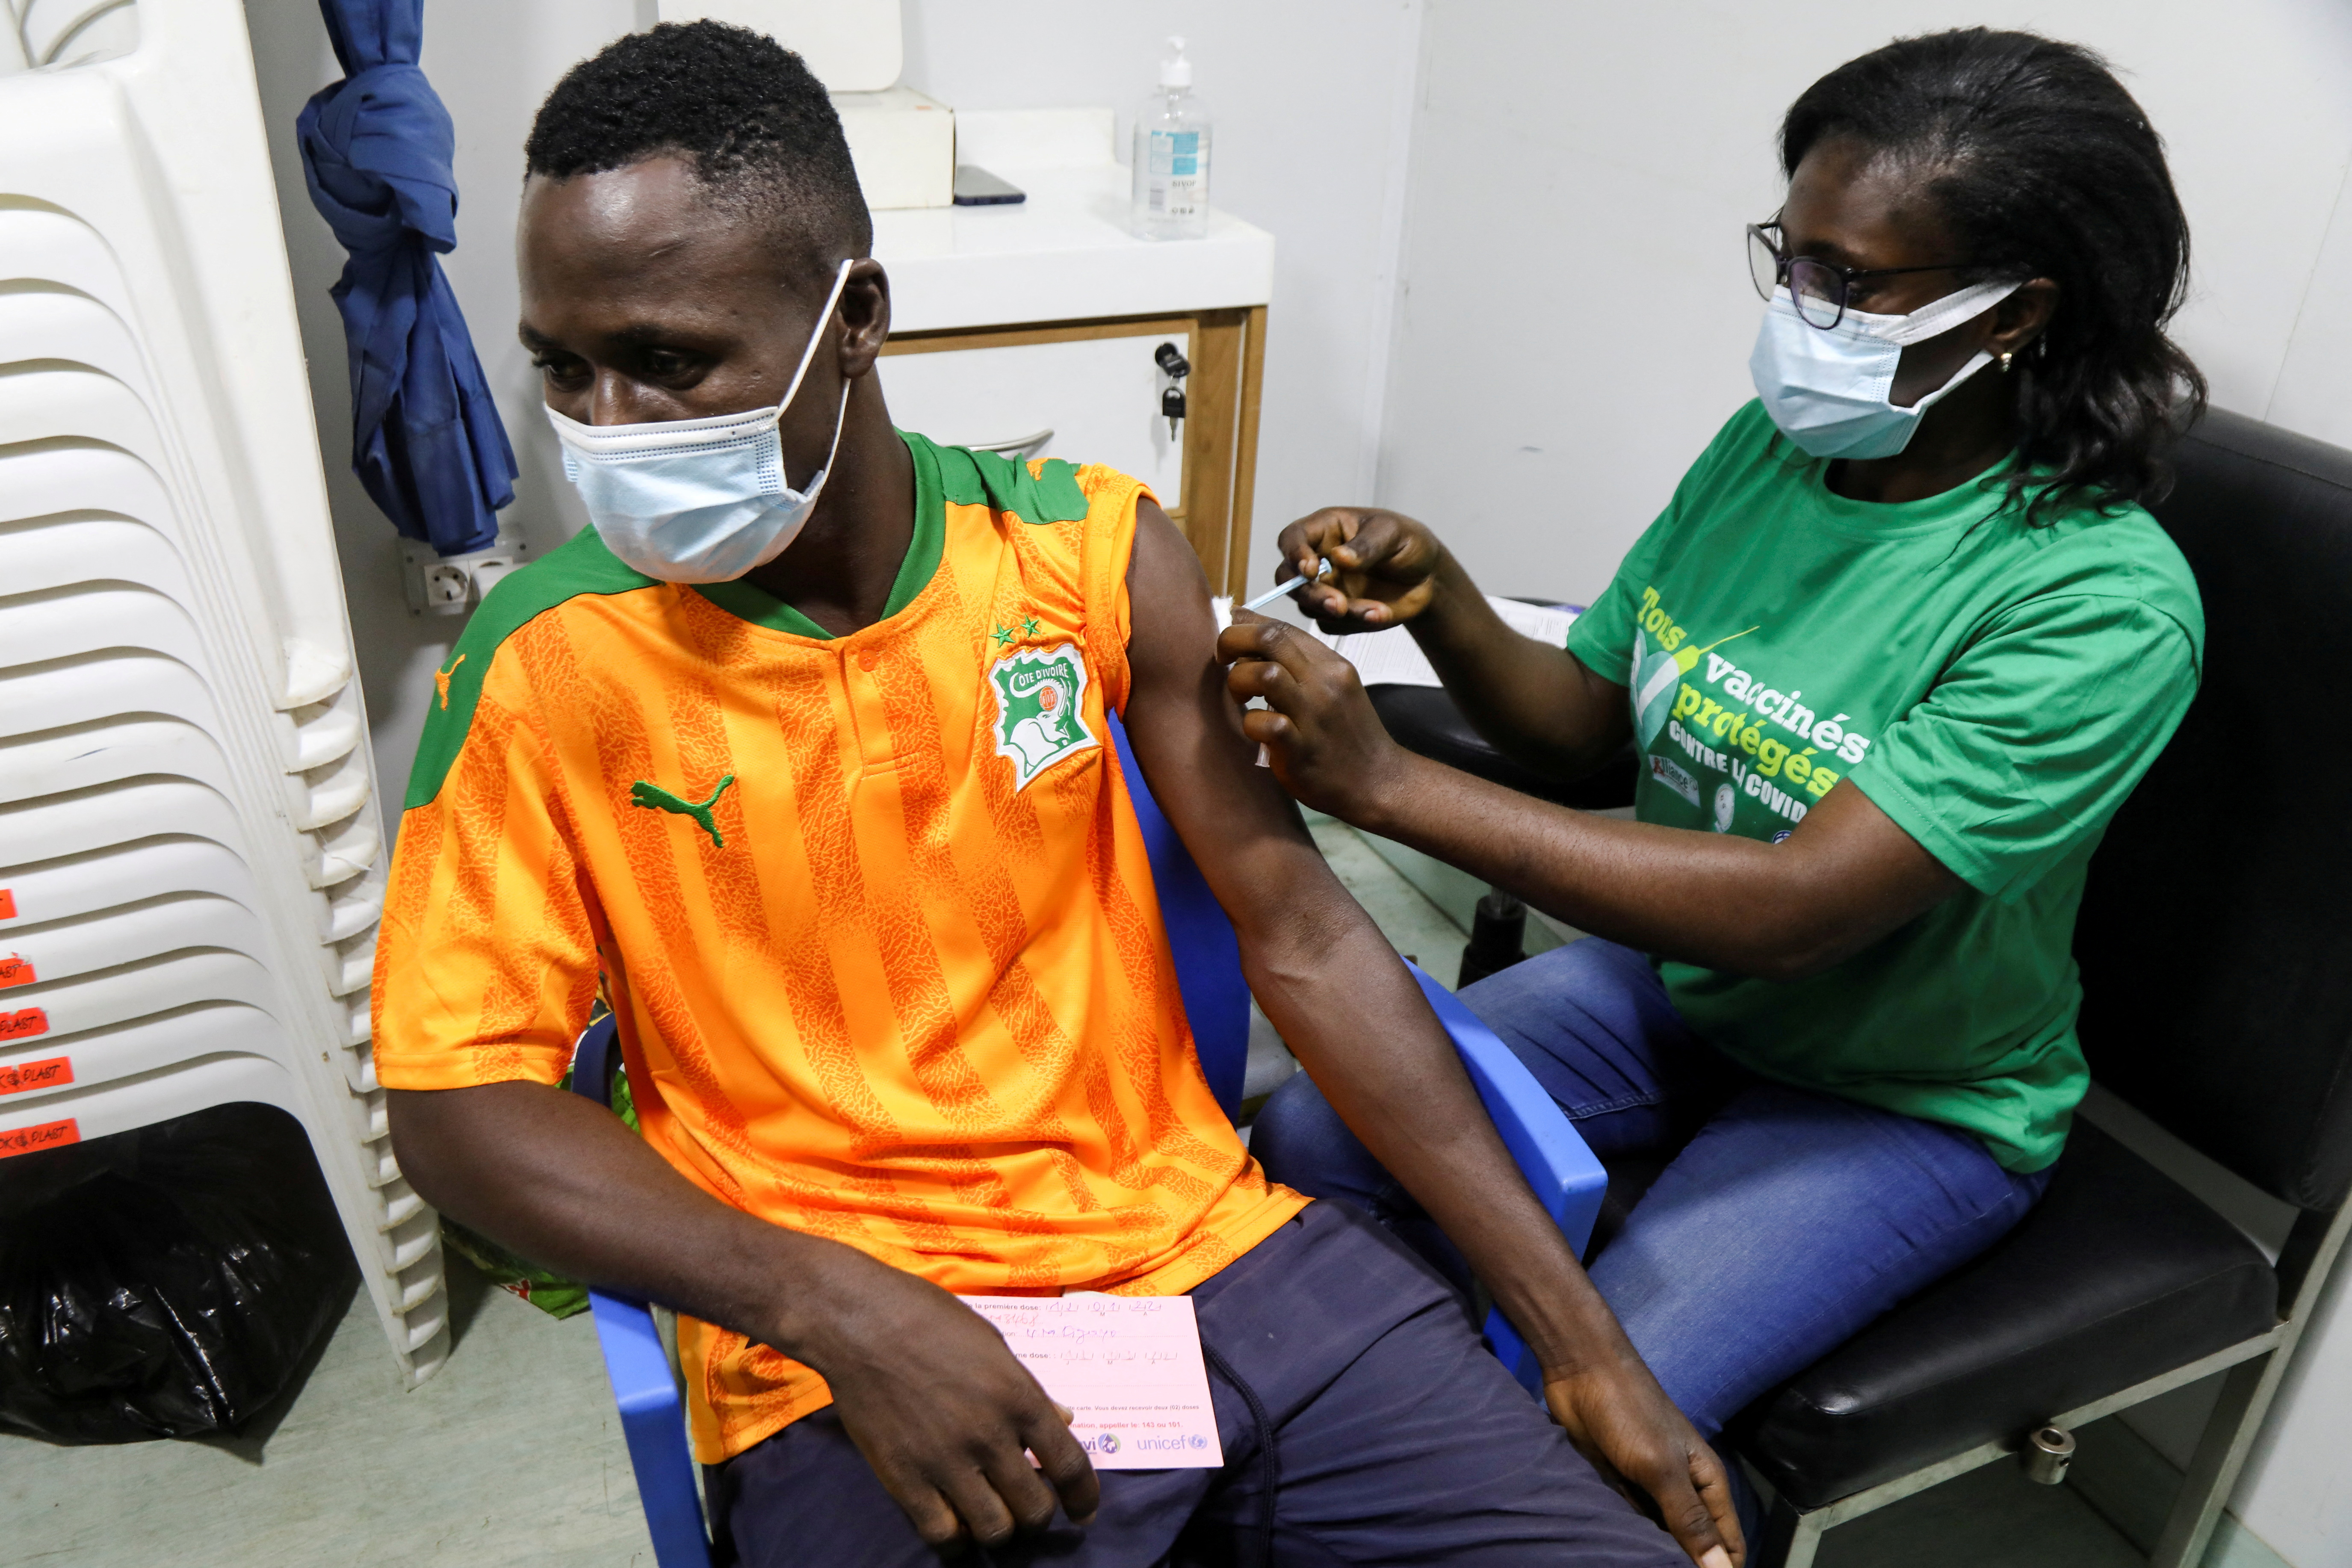 Soccer fans in Ivory Coast get the vaccinated against the coronavirus disease (COVID-19) to watch their team play